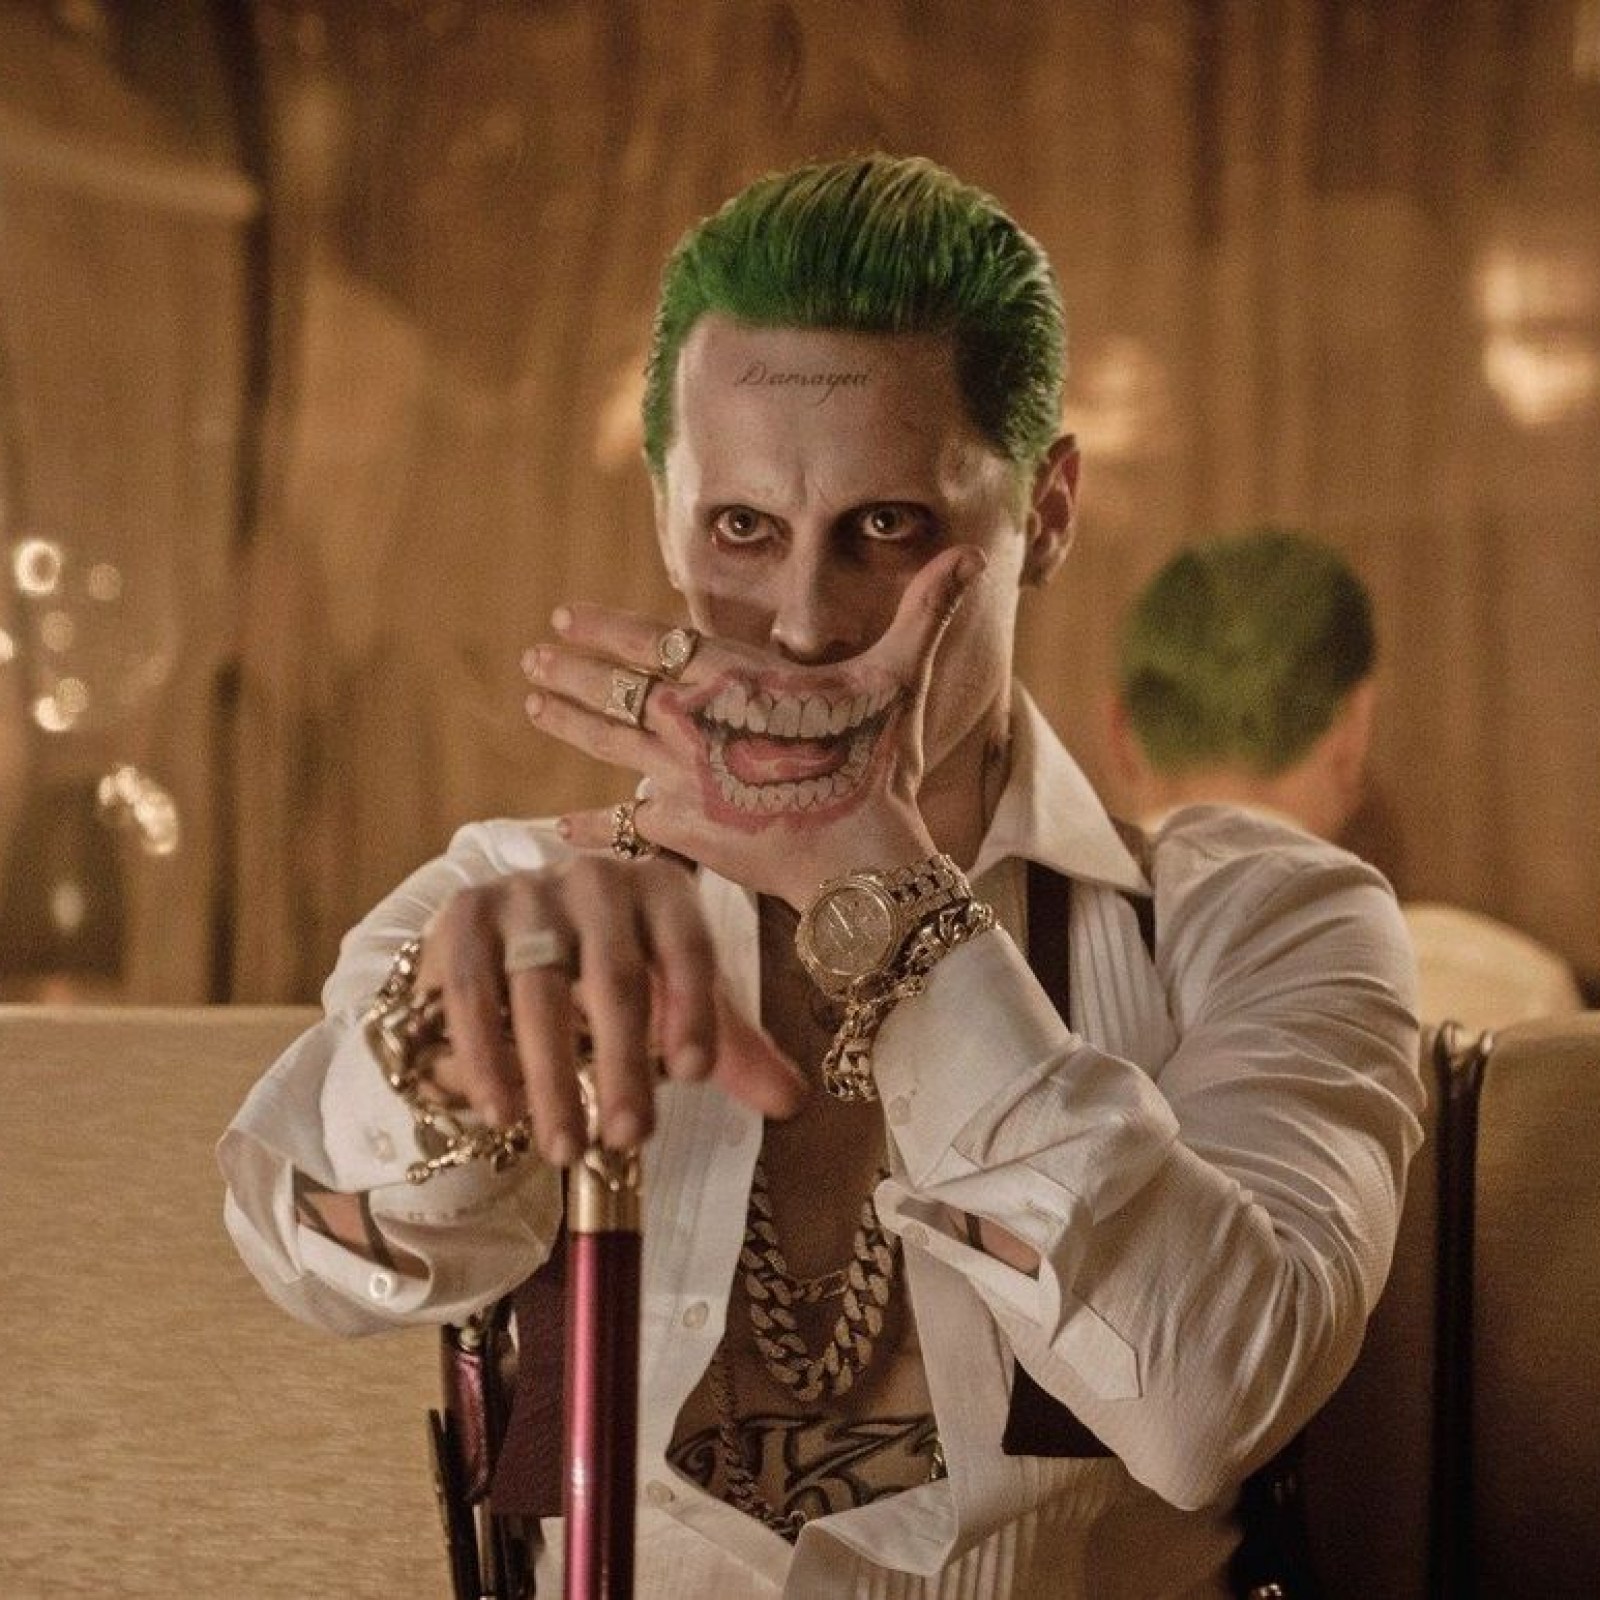 Jared Leto's 'amazing' Joker on tap for 'Suicide Squad